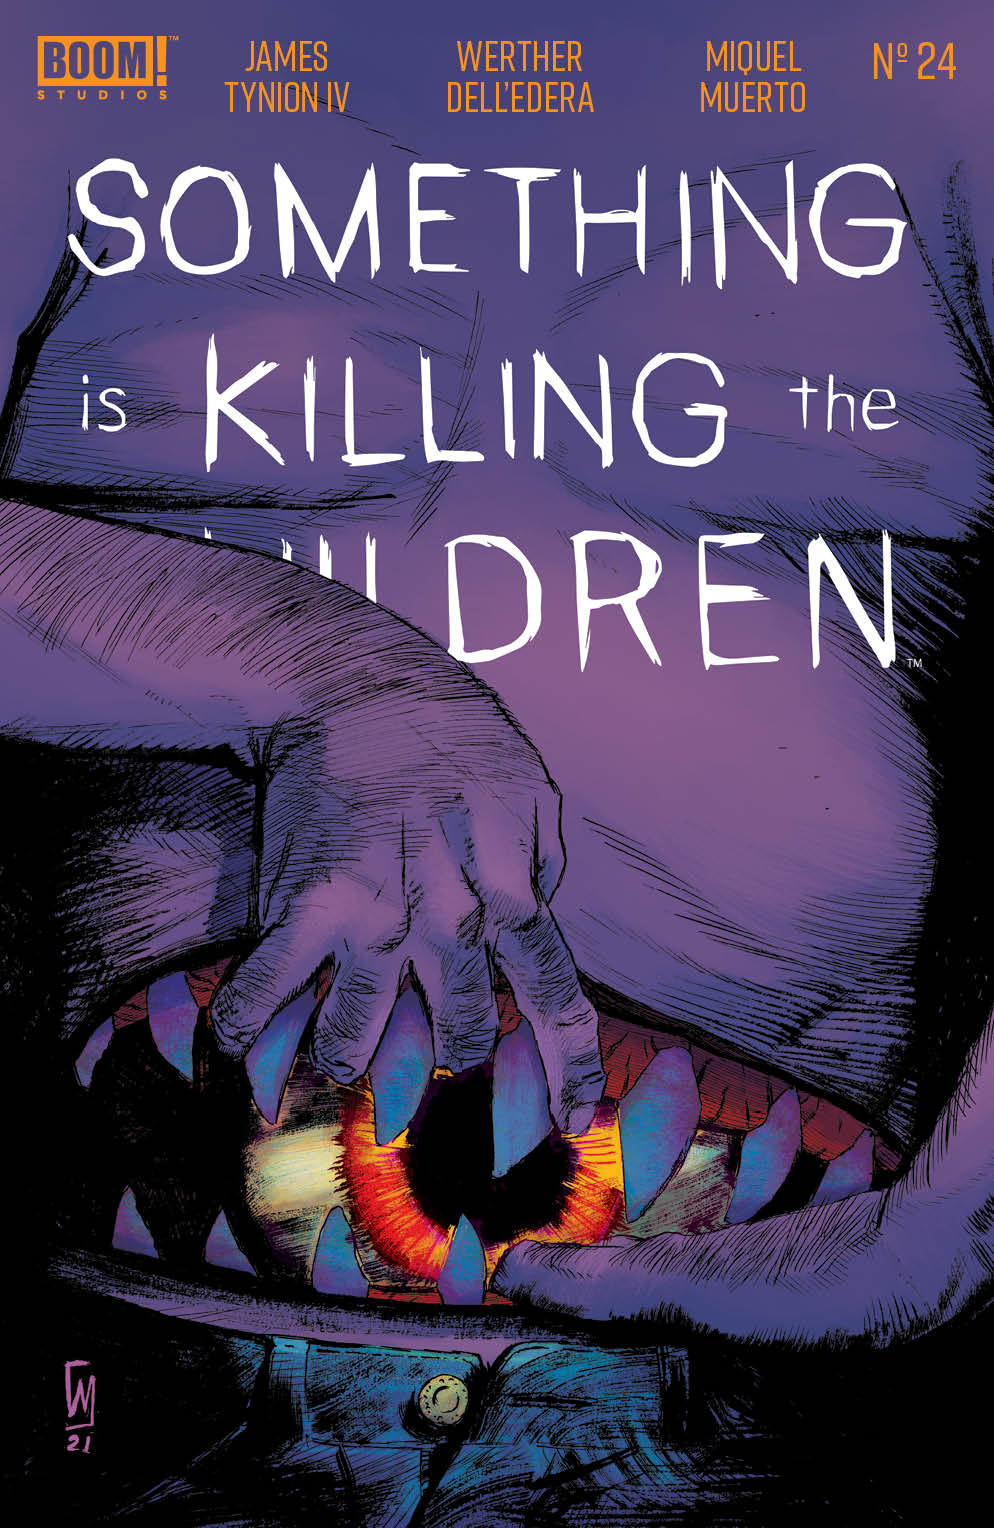 Something Is Killing the Children #12 VF/NM Werther Dell'Edera Cover 2019 